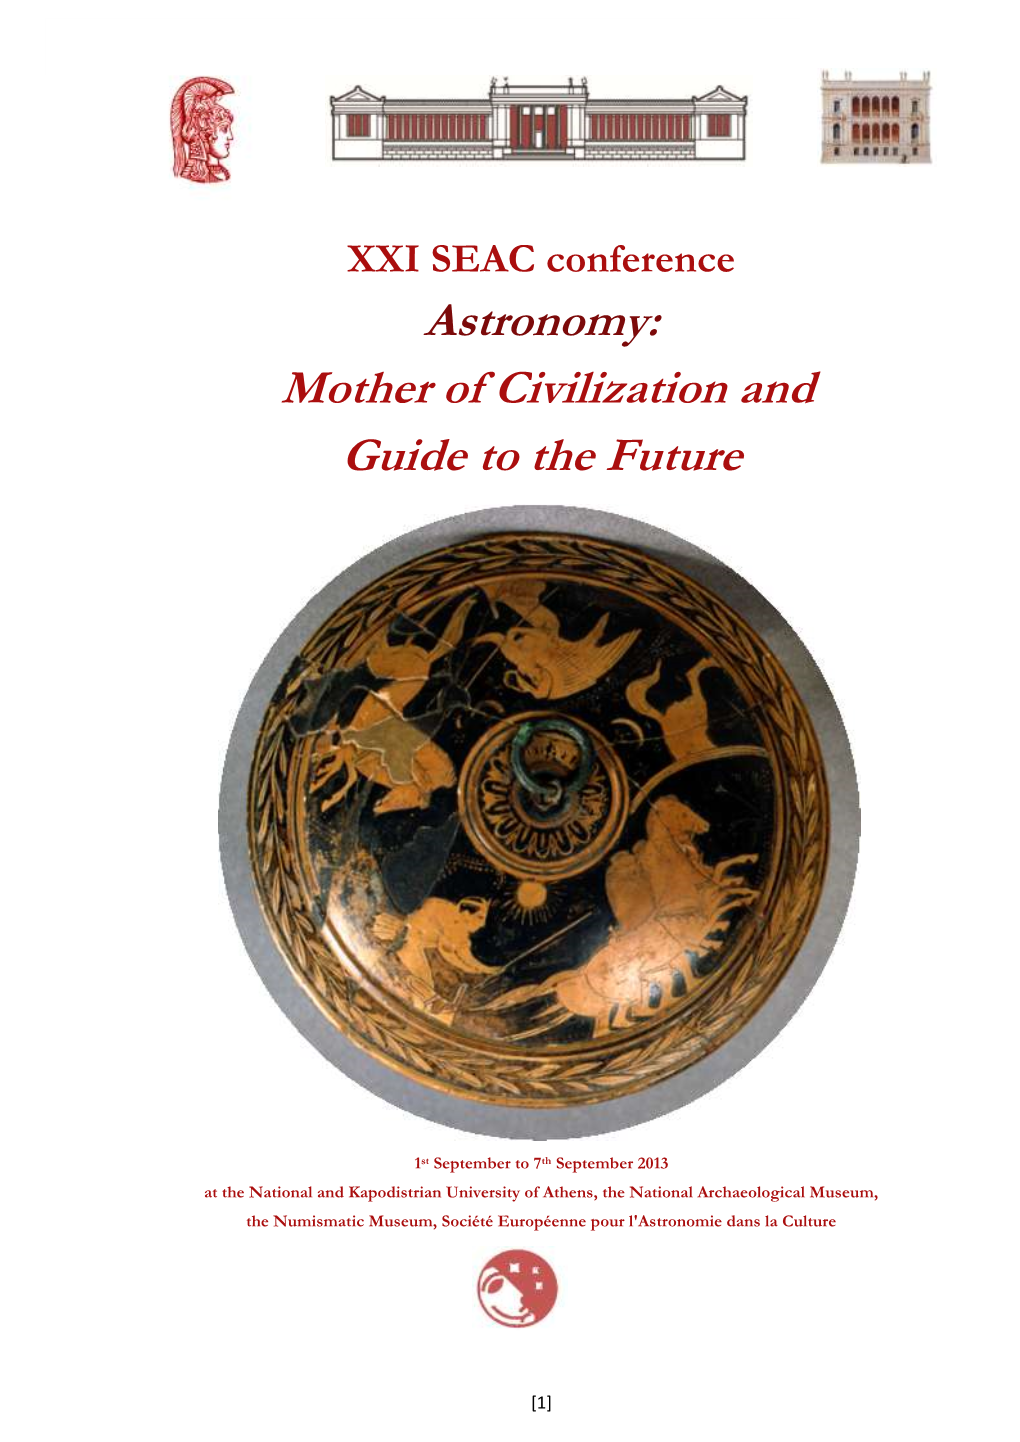 Abstract Book, SEAC Conference, Astronomy Mother of Civilization and Guide to the Future, Athens 2013 Scientific Organizing Committee